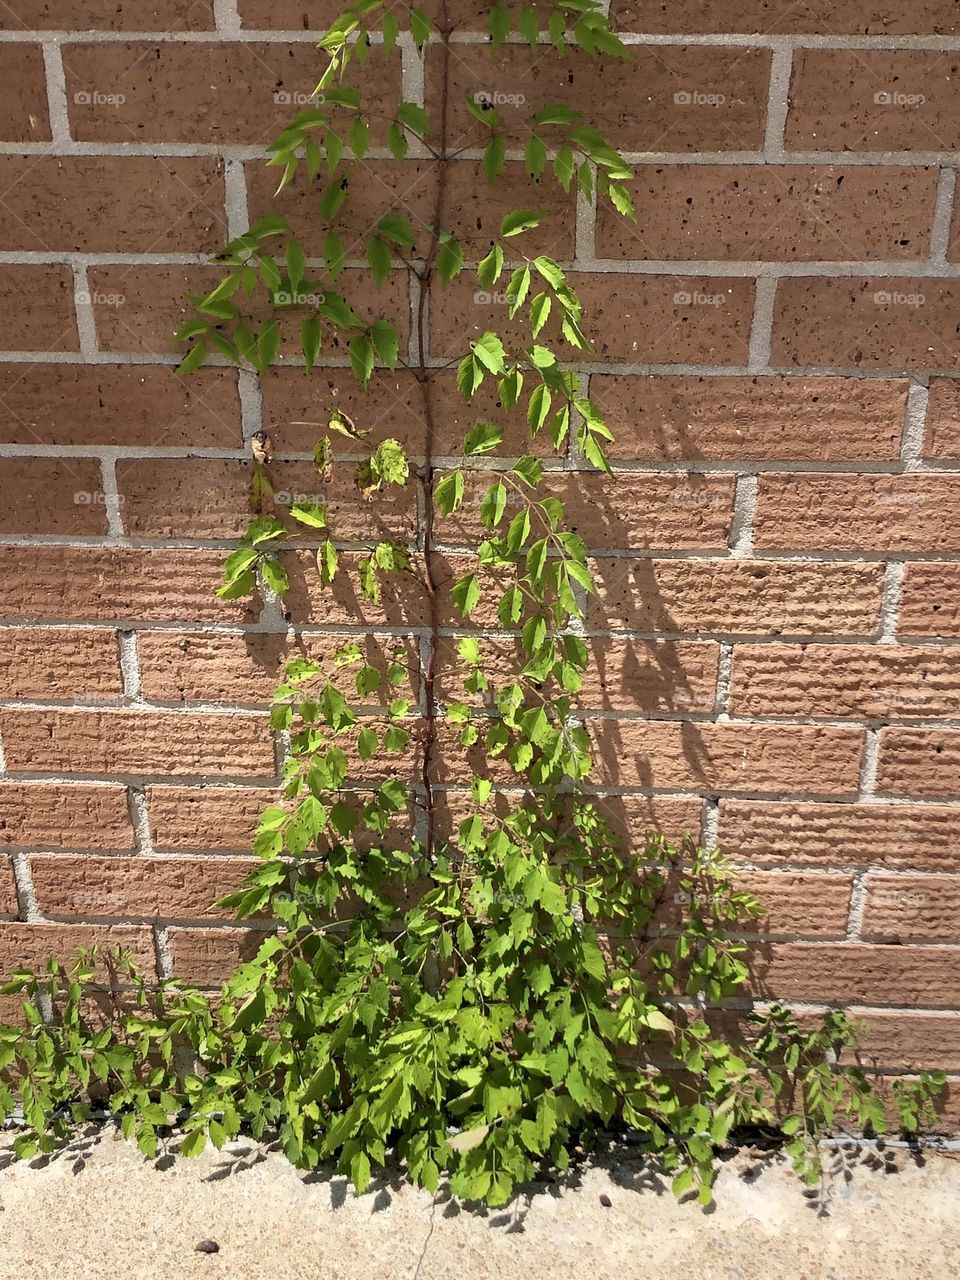 Flora growing in Tennessee climbing wall